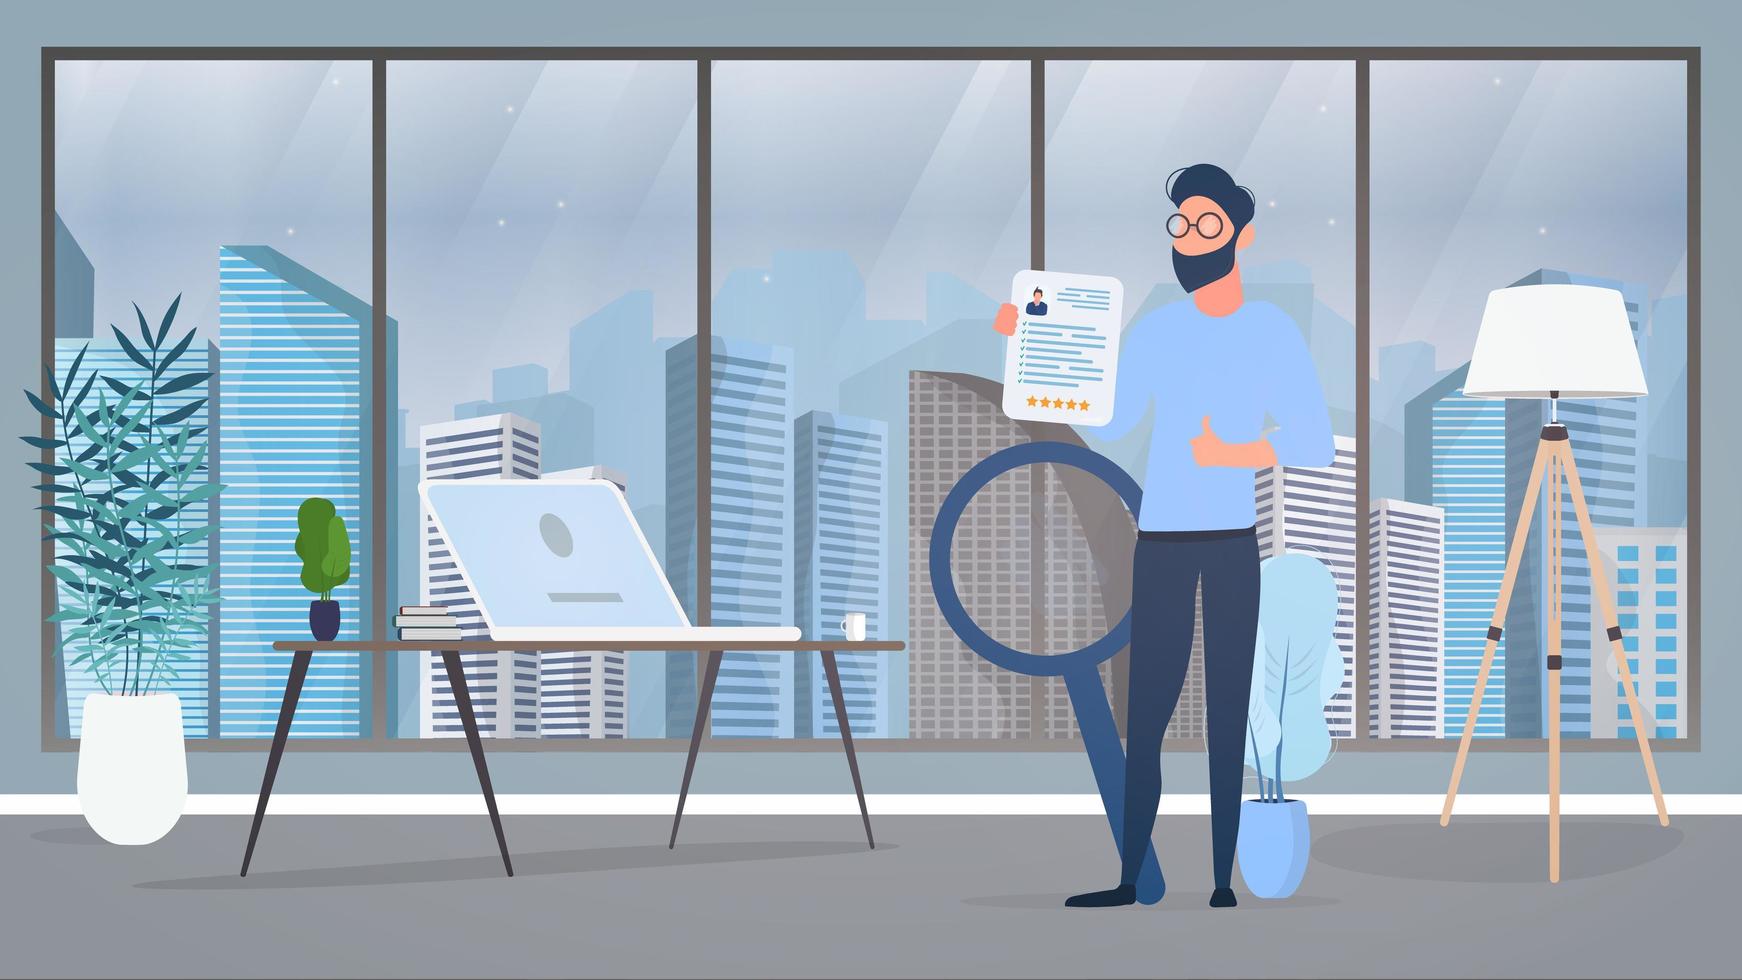 Stylish man with glasses. The guy holds a resume in his hands and shows the class. Office, workplace, laptop, floor lamp, houseplant. The concept of finding people for work. In isolation. Vector